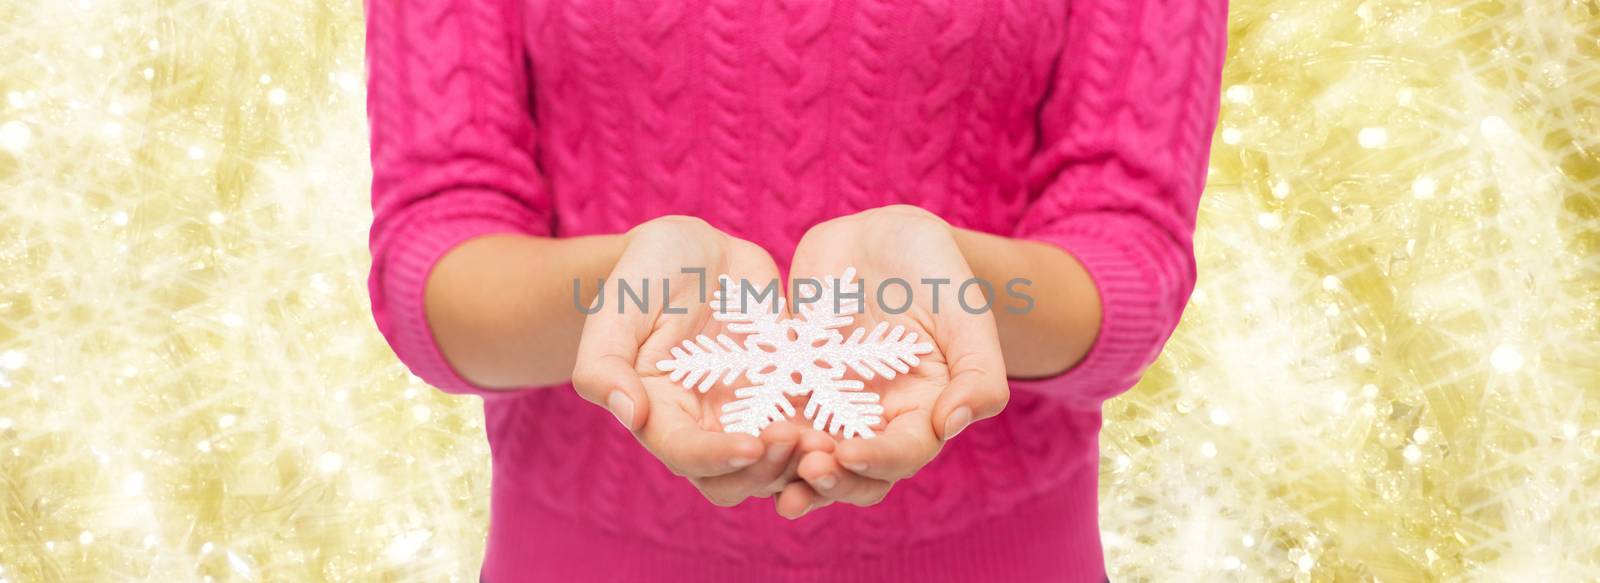 christmas, holidays and people concept - close up of woman in pink sweater holding snowflake over yellow background